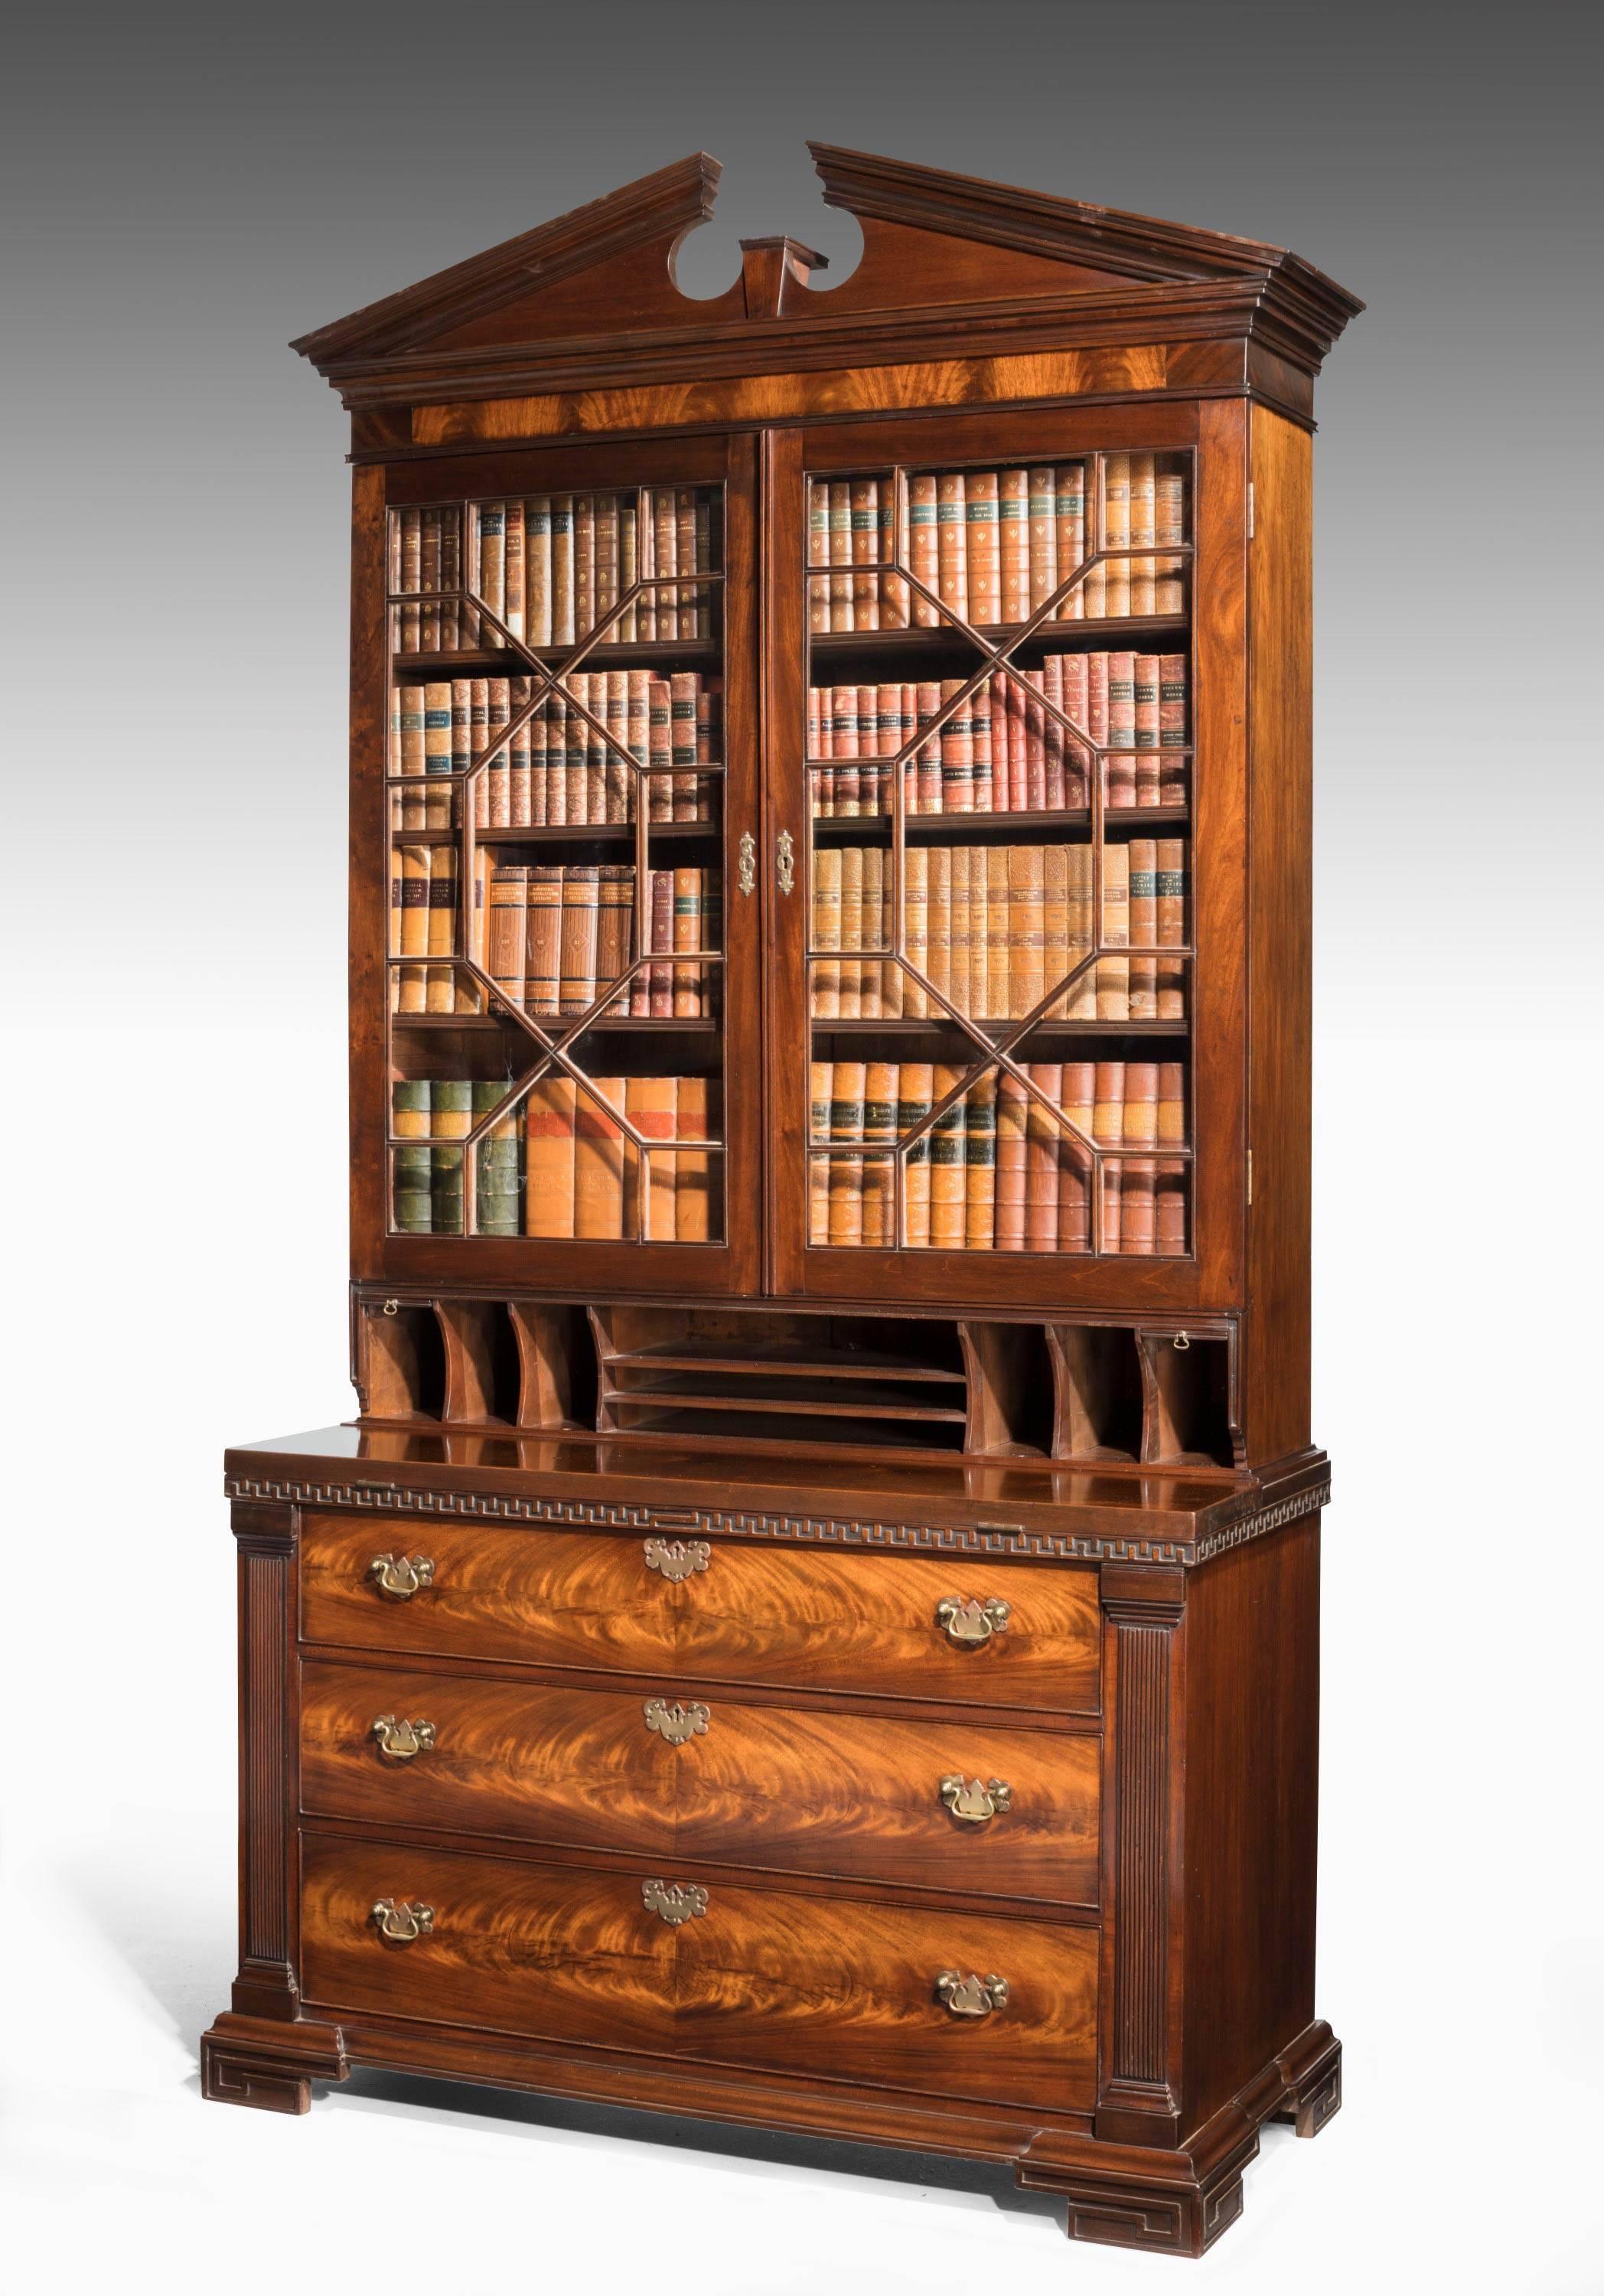 A very good quality Chippendale period mahogany secretaire bookcase. The top with astragal glazing over a very well fitted interior and original pediment. The base left and right hand doors with matching timbers. The centre section with pigeon holes.